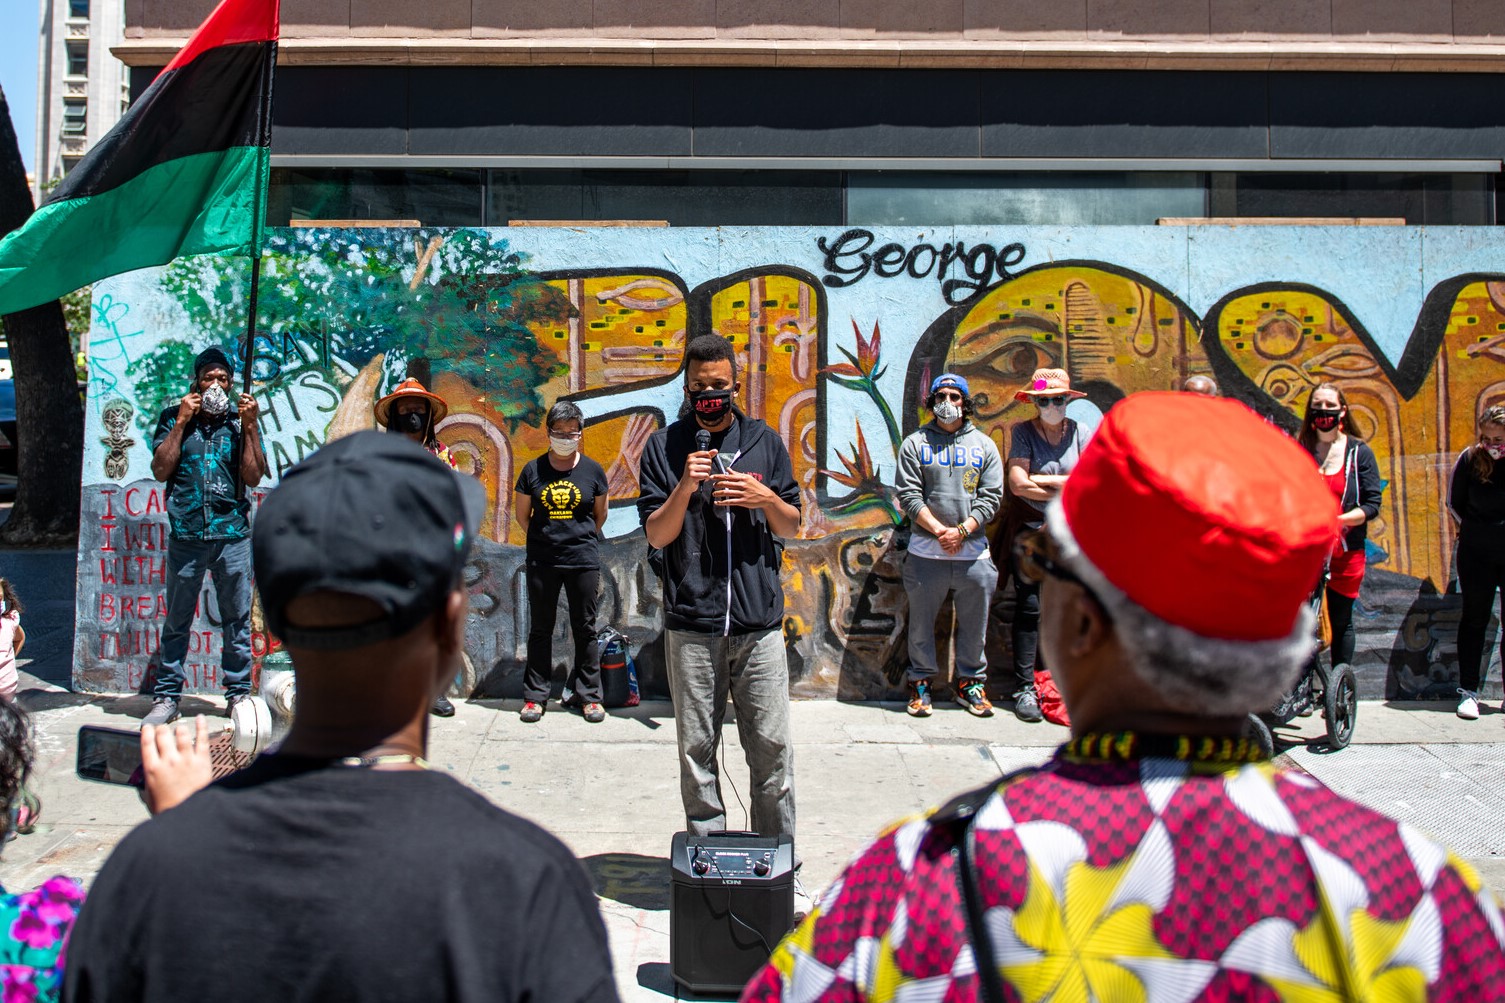 James Burch from Anti-Police Terror Project (APTP) speaks to a crowd in Oakland on May 25, 2021.